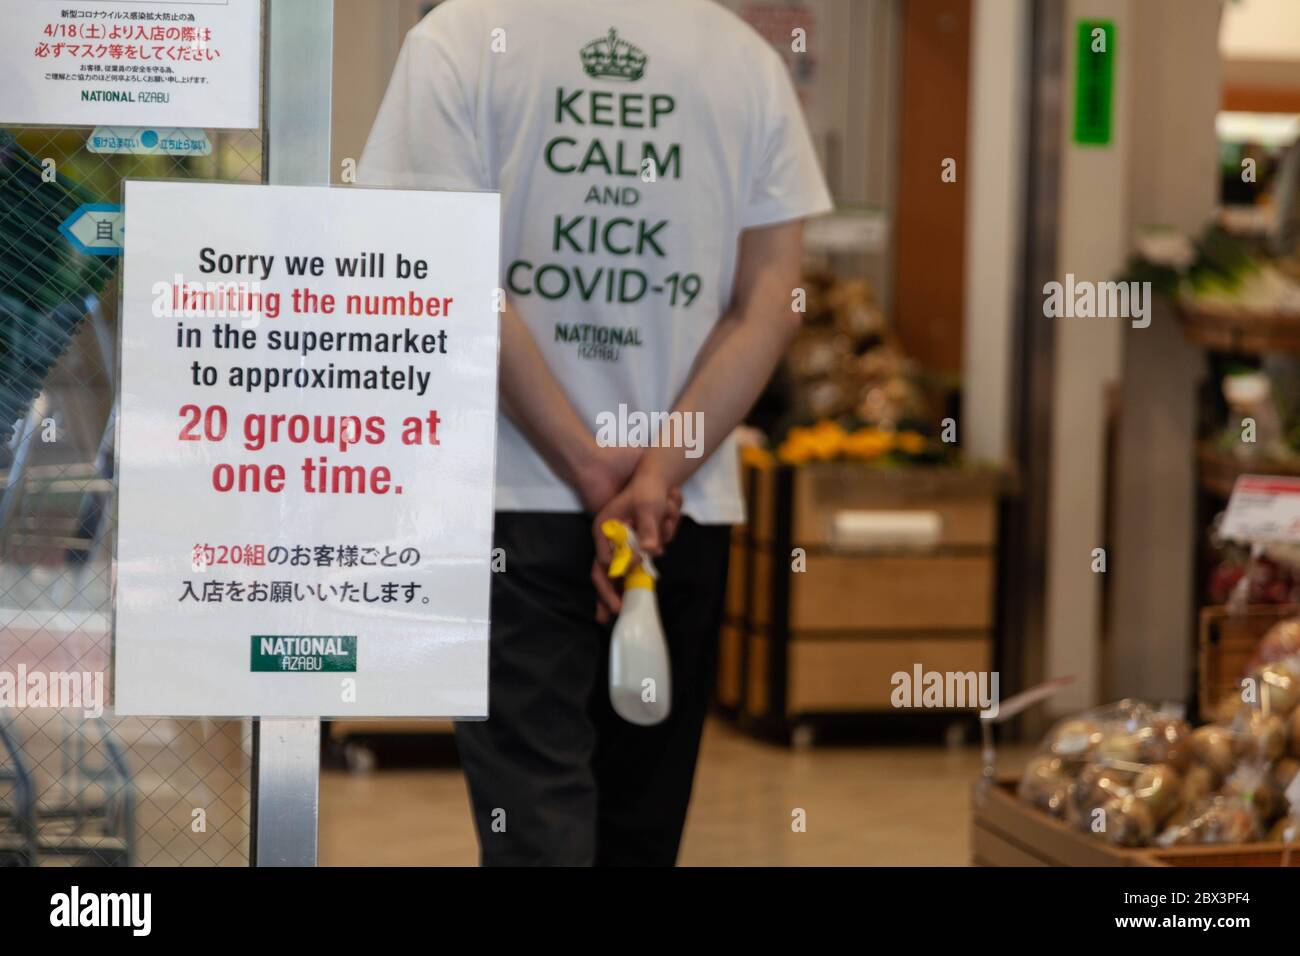 A sign outside a supermarket in Hiroo in central Tokyo, Japan informs customers only 20 groups are allowed at one time to follow social distancing guidelines, while a person wears a shirt with a defiant slogan reading Keep Calm and Kick Covid-19 during an outbreak of COVID-19 coronavirus, April 29, 2020. Photographer credit Niclas Ericsson. () Stock Photo